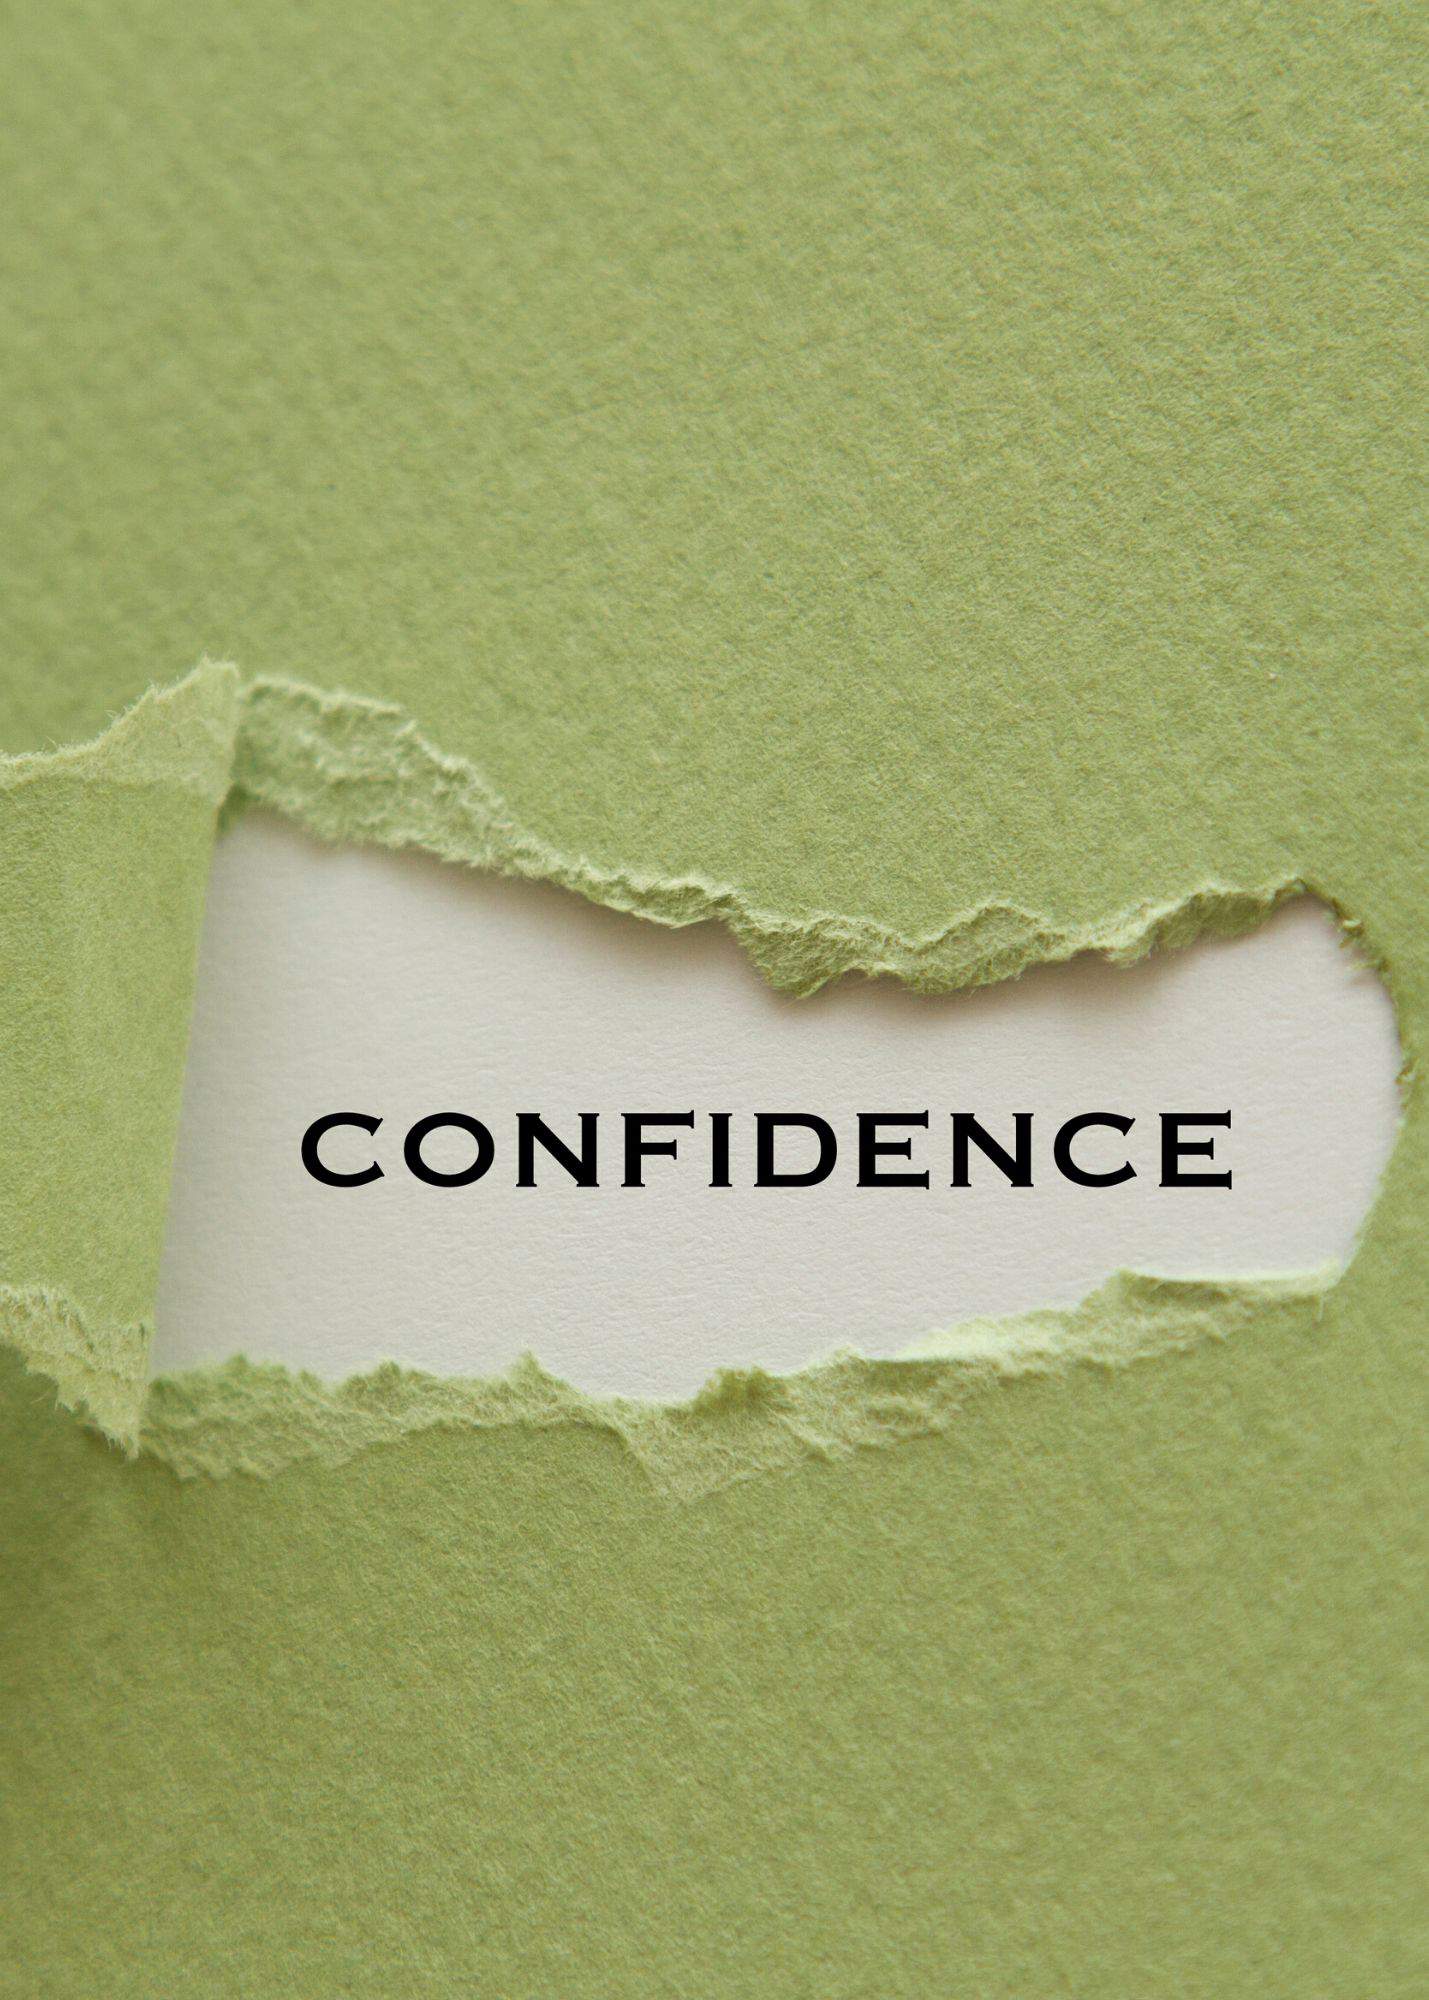 torn green craft paper with the word confidence showing